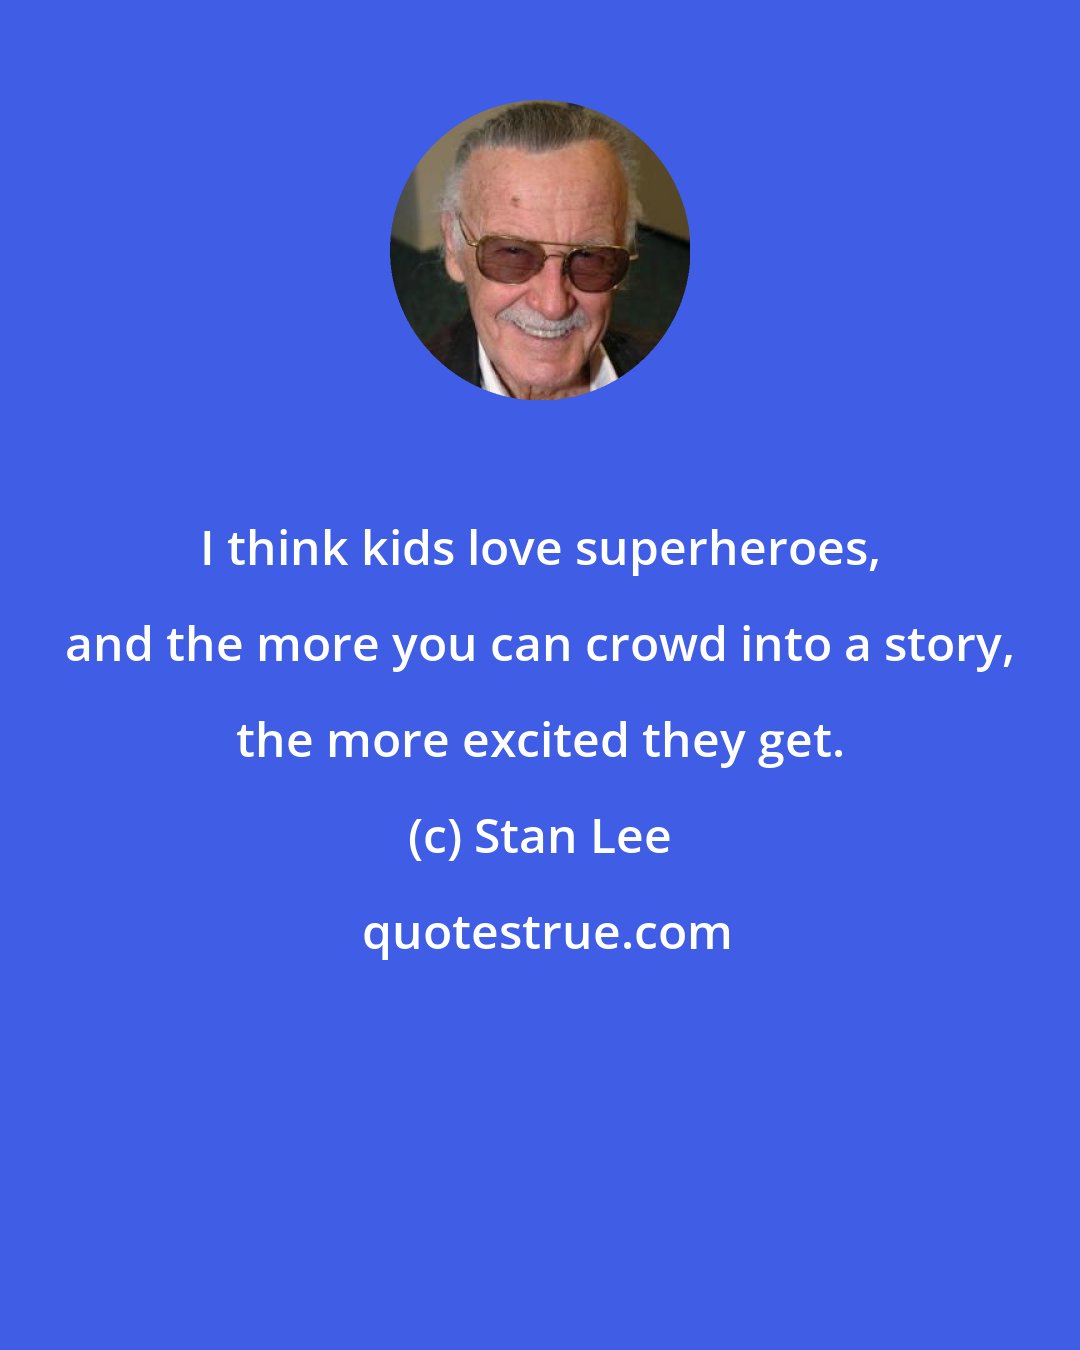 Stan Lee: I think kids love superheroes, and the more you can crowd into a story, the more excited they get.